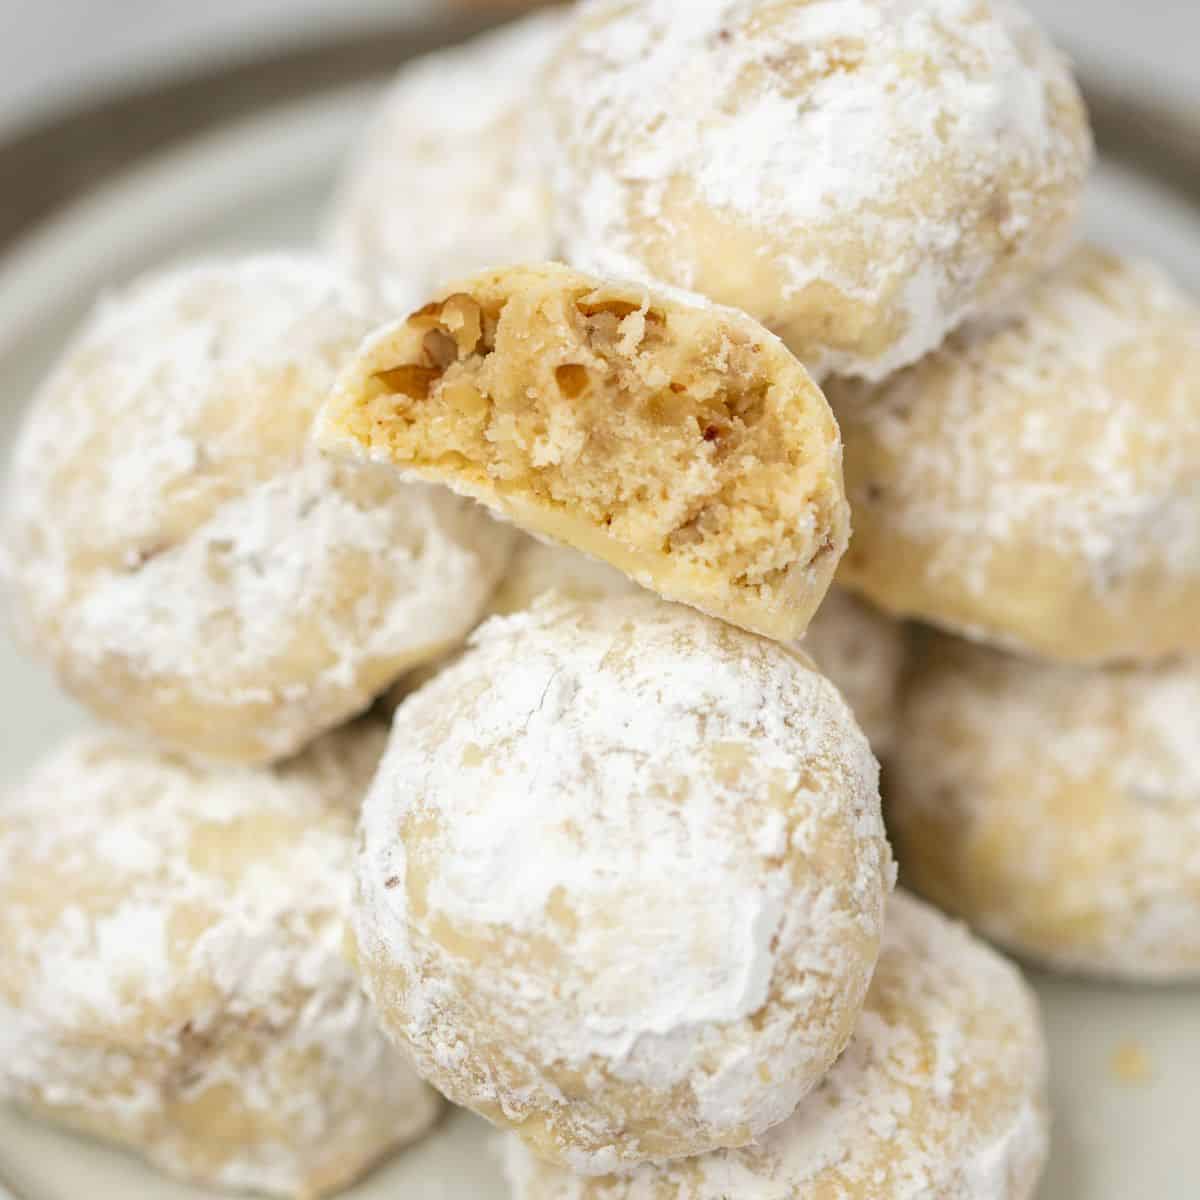 Close up of snowball of cookies cut open showing pecans and light interior of cookies.